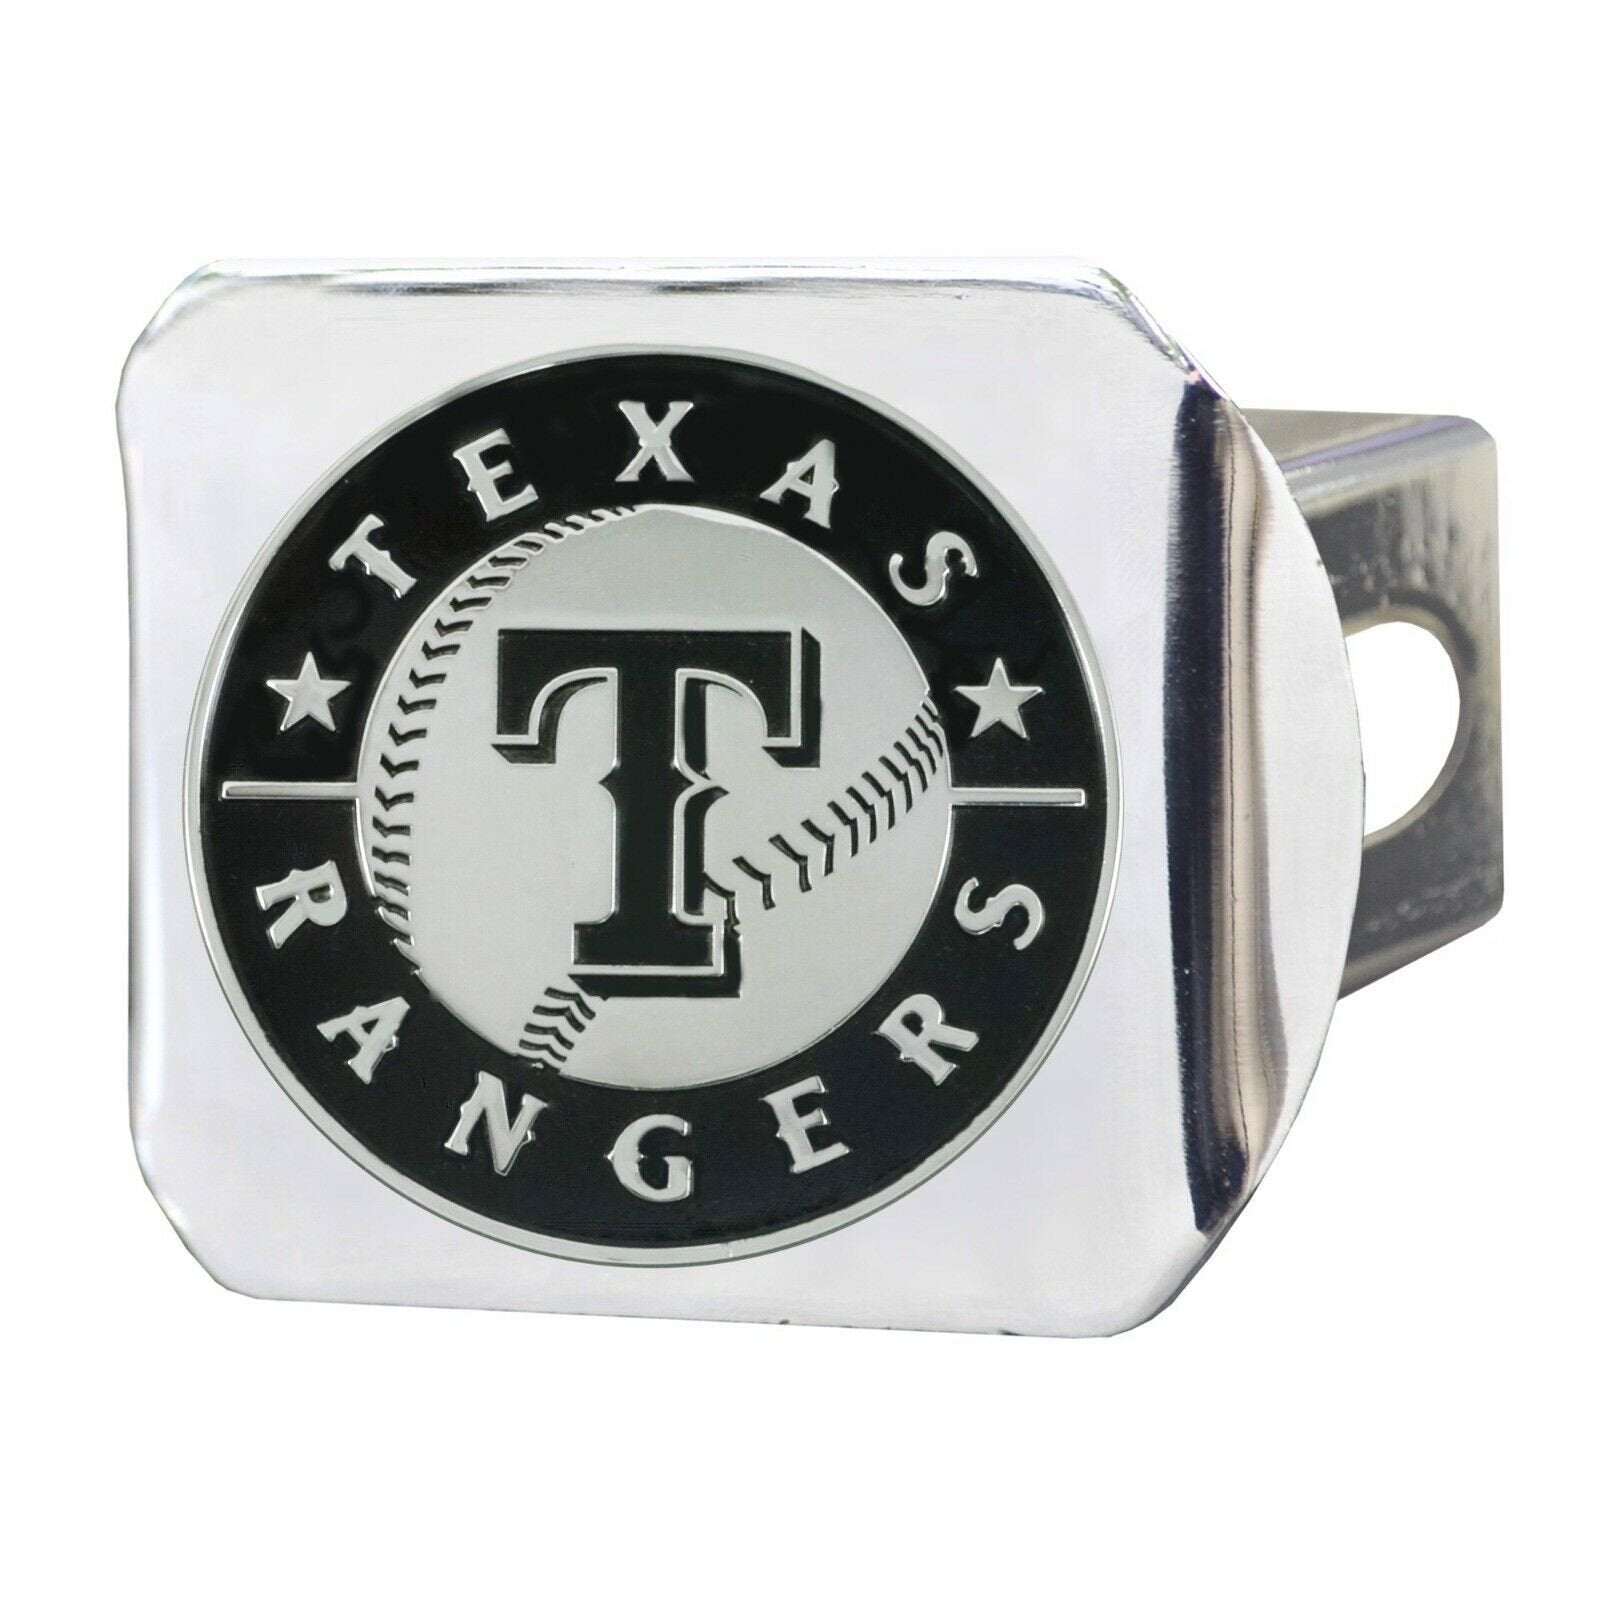 Texas Rangers Hitch Cover Solid Metal with Raised Chrome Metal Emblem 2" Square Type III